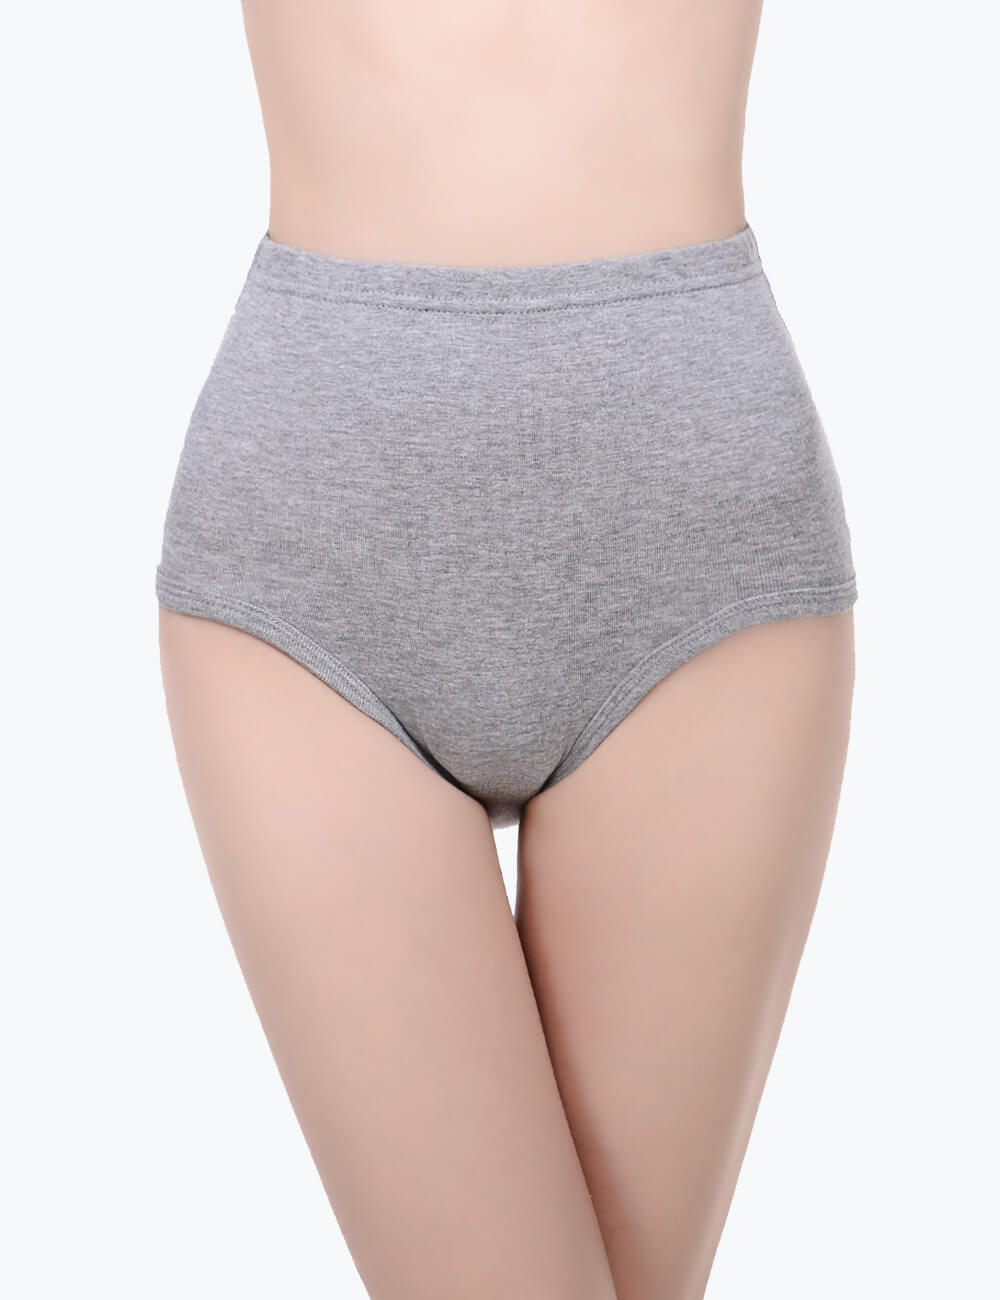 Urinary incontinence pants: pee-proof underwear explained